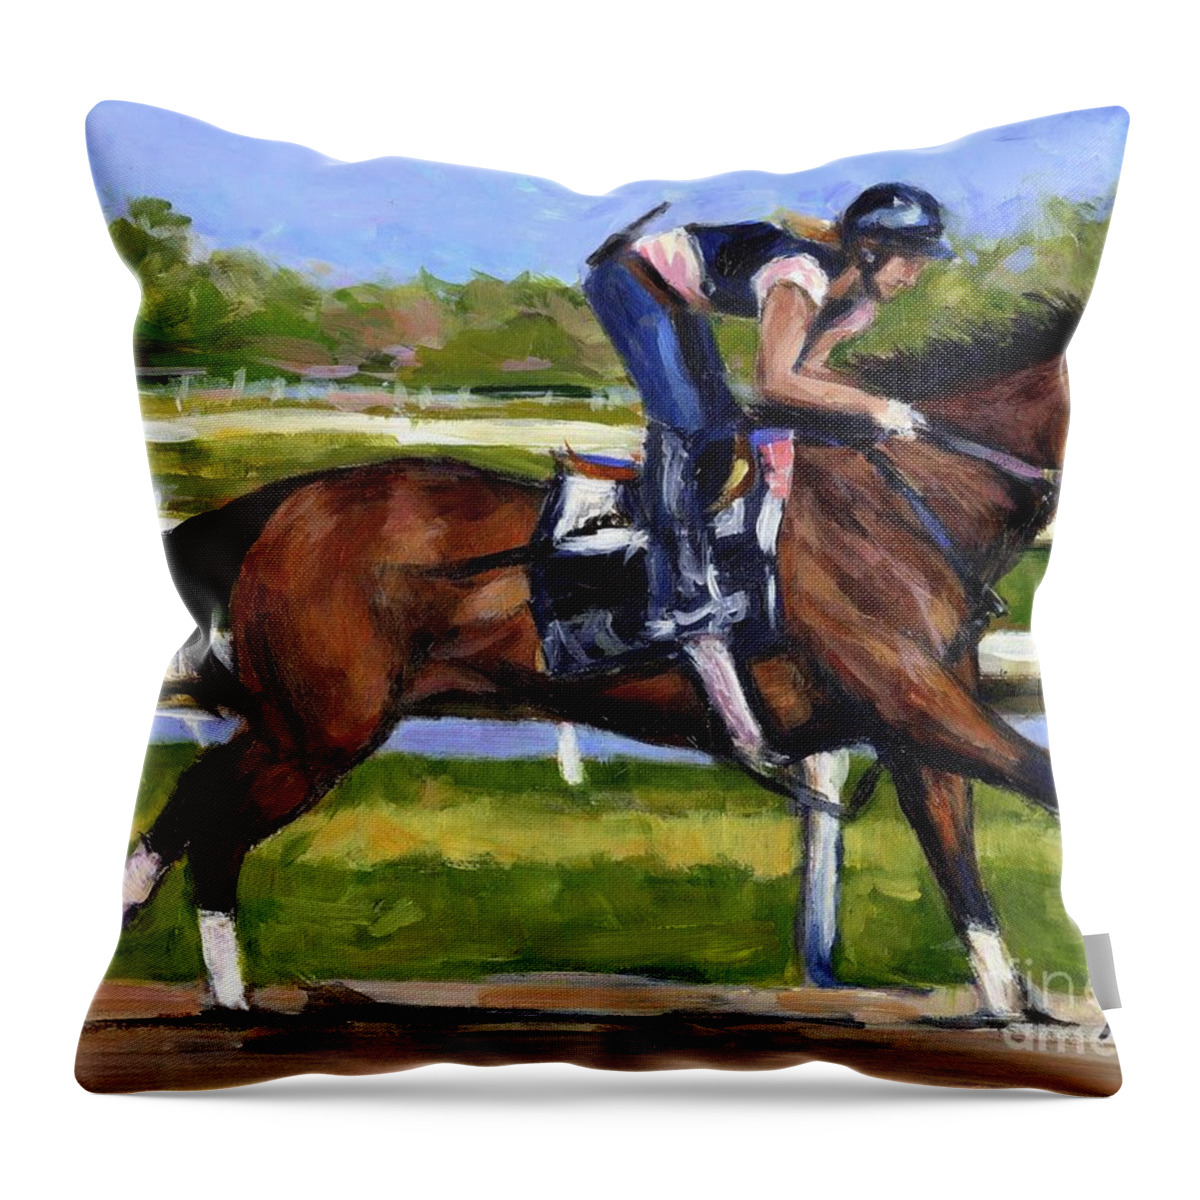 Horse Throw Pillow featuring the painting Onlyforyou by Molly Poole